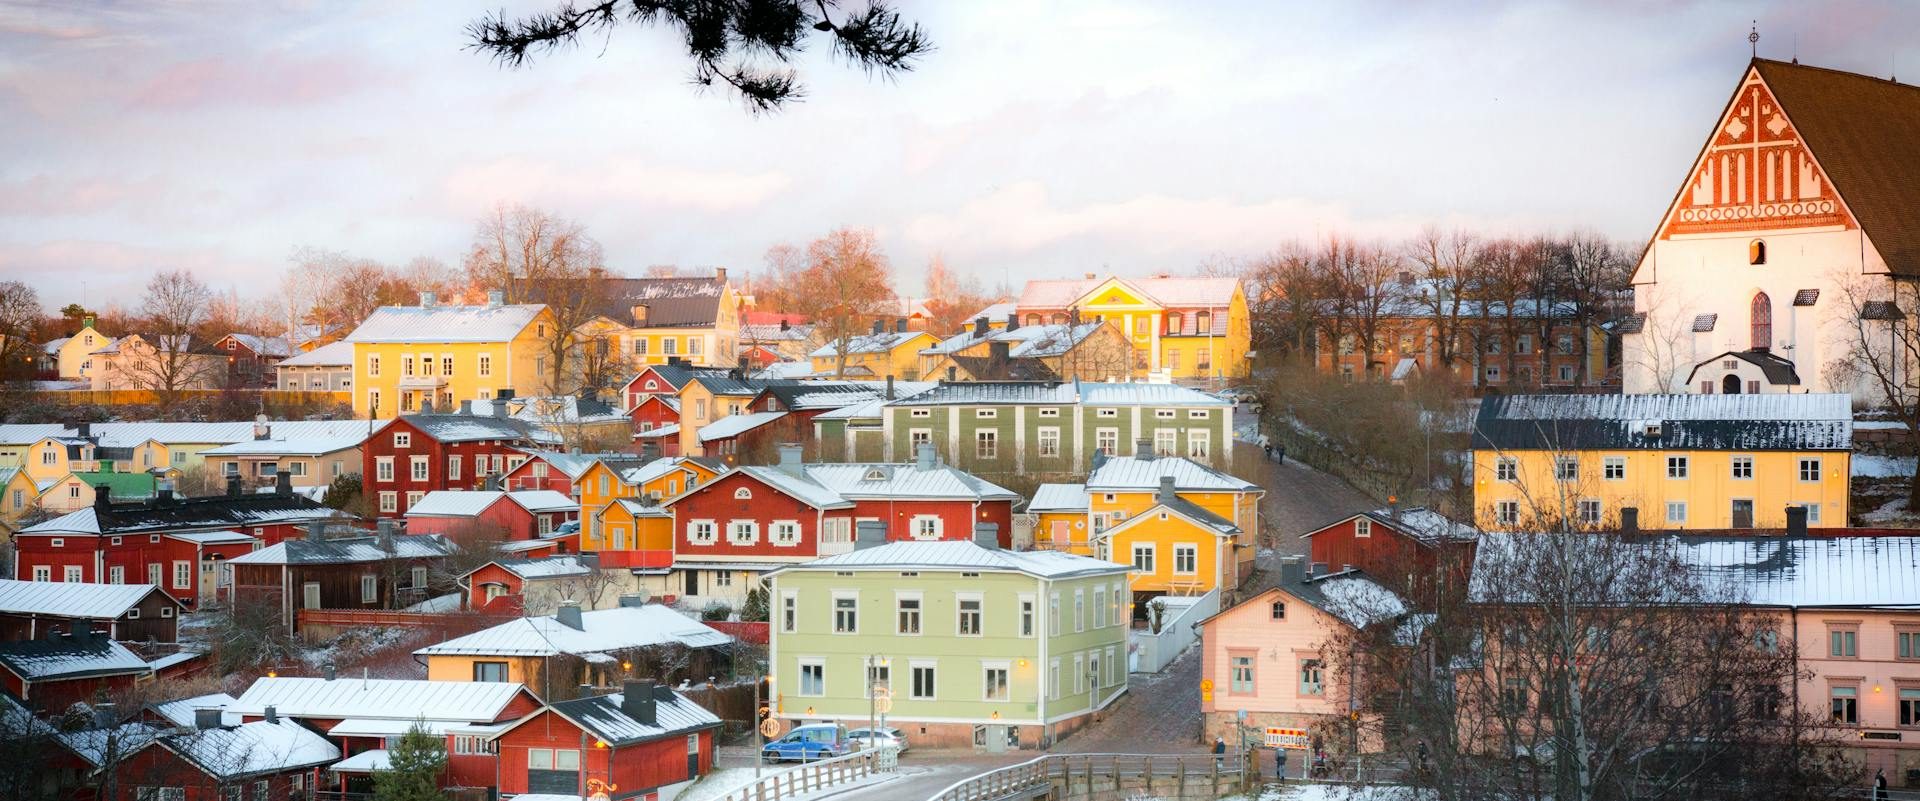 Moving to finland a beautiful neighbourhood with colourful houses